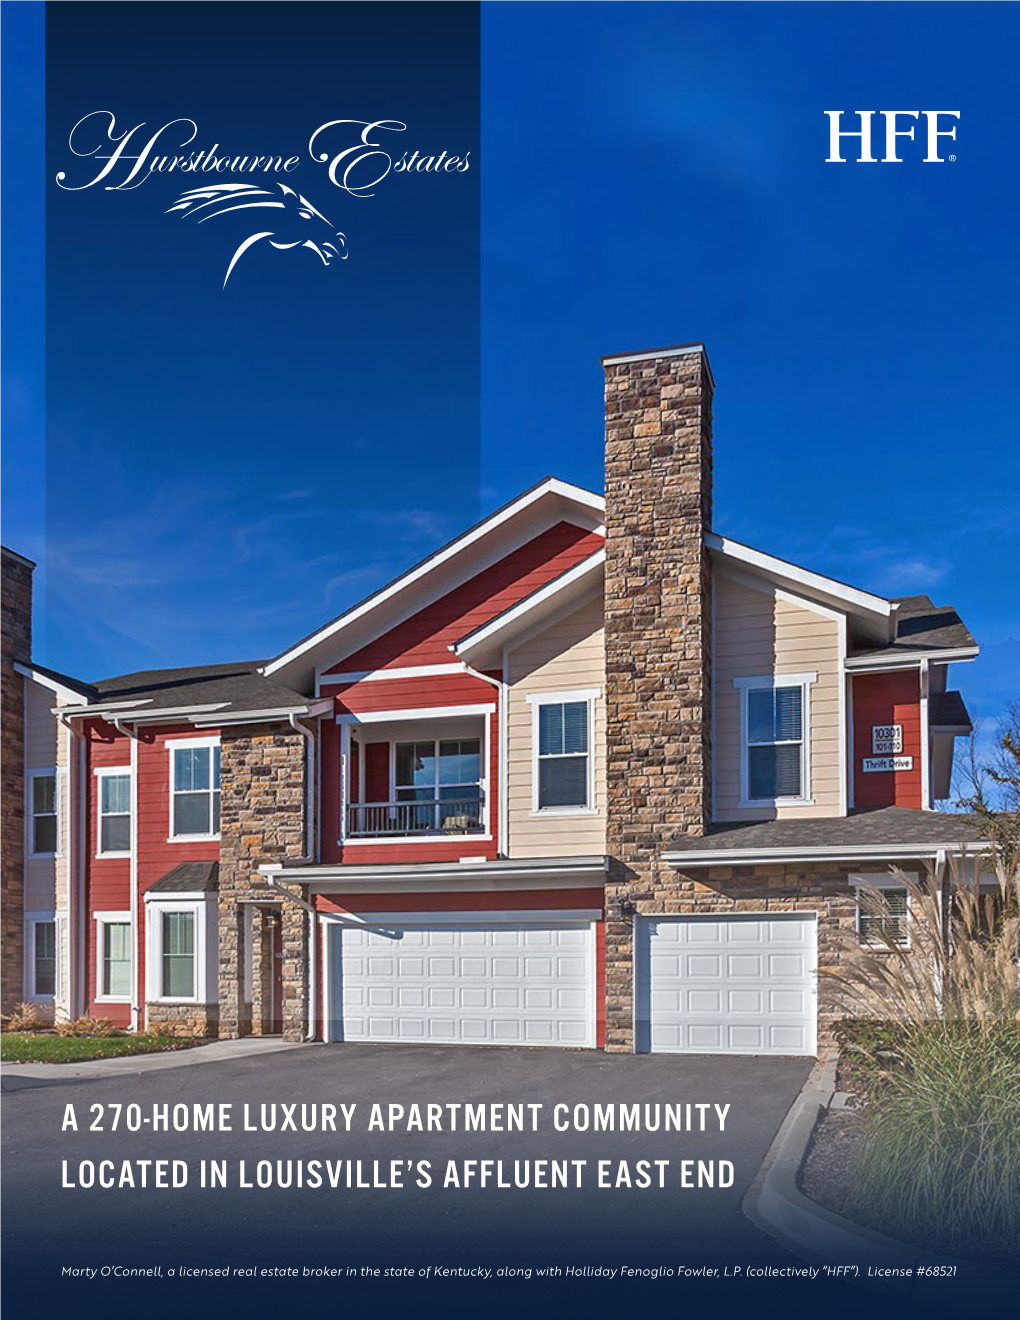 A 270-Home Luxury Apartment Community Located in Louisville's